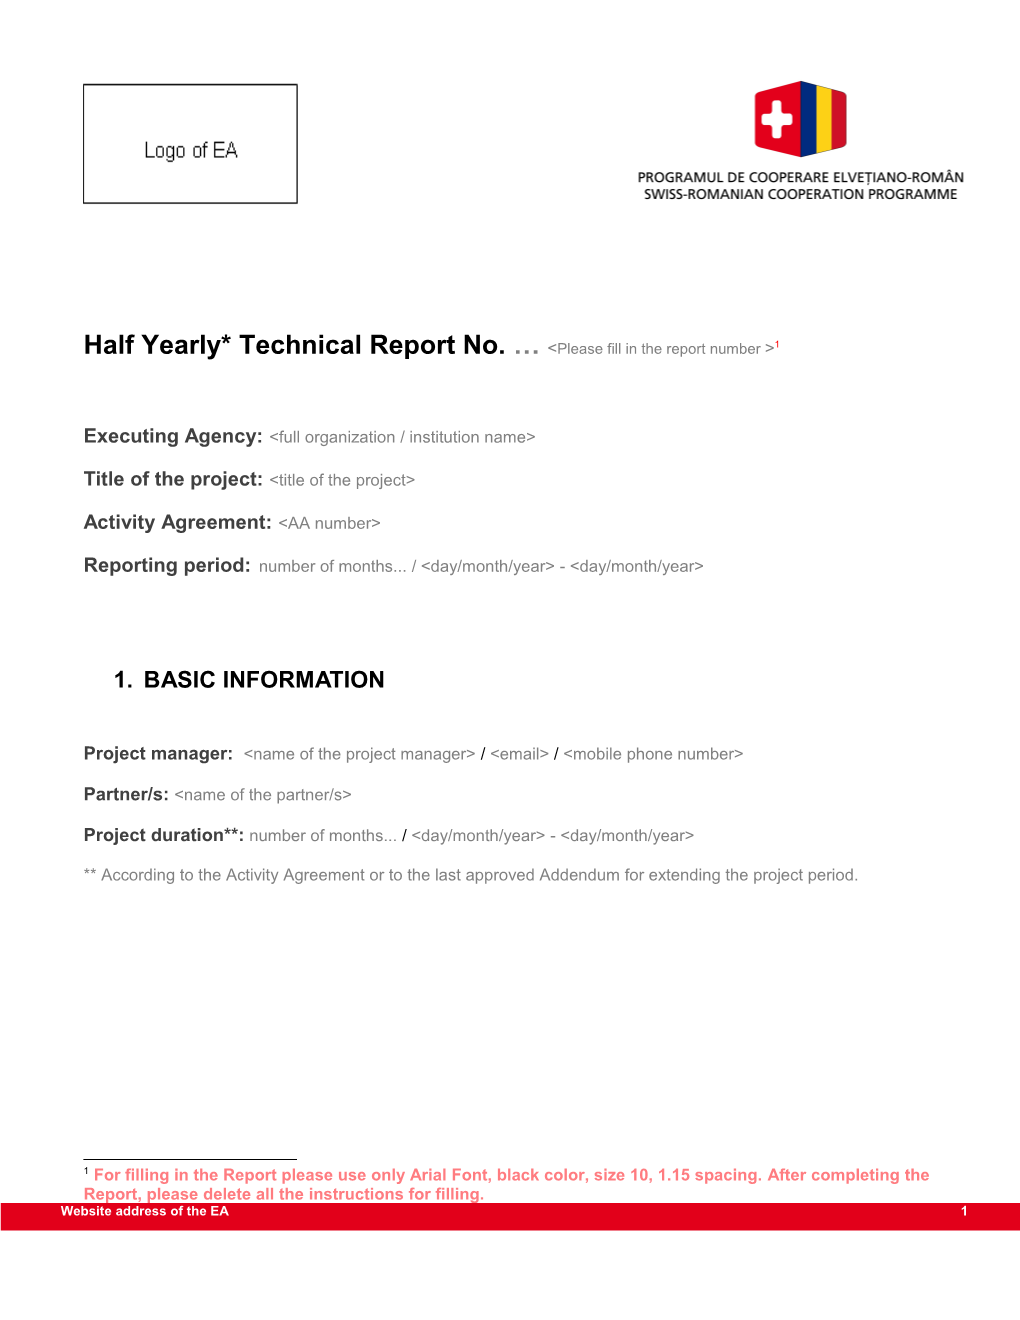 Half Yearly*Technical Report No. Please Fill in the Report Number 1